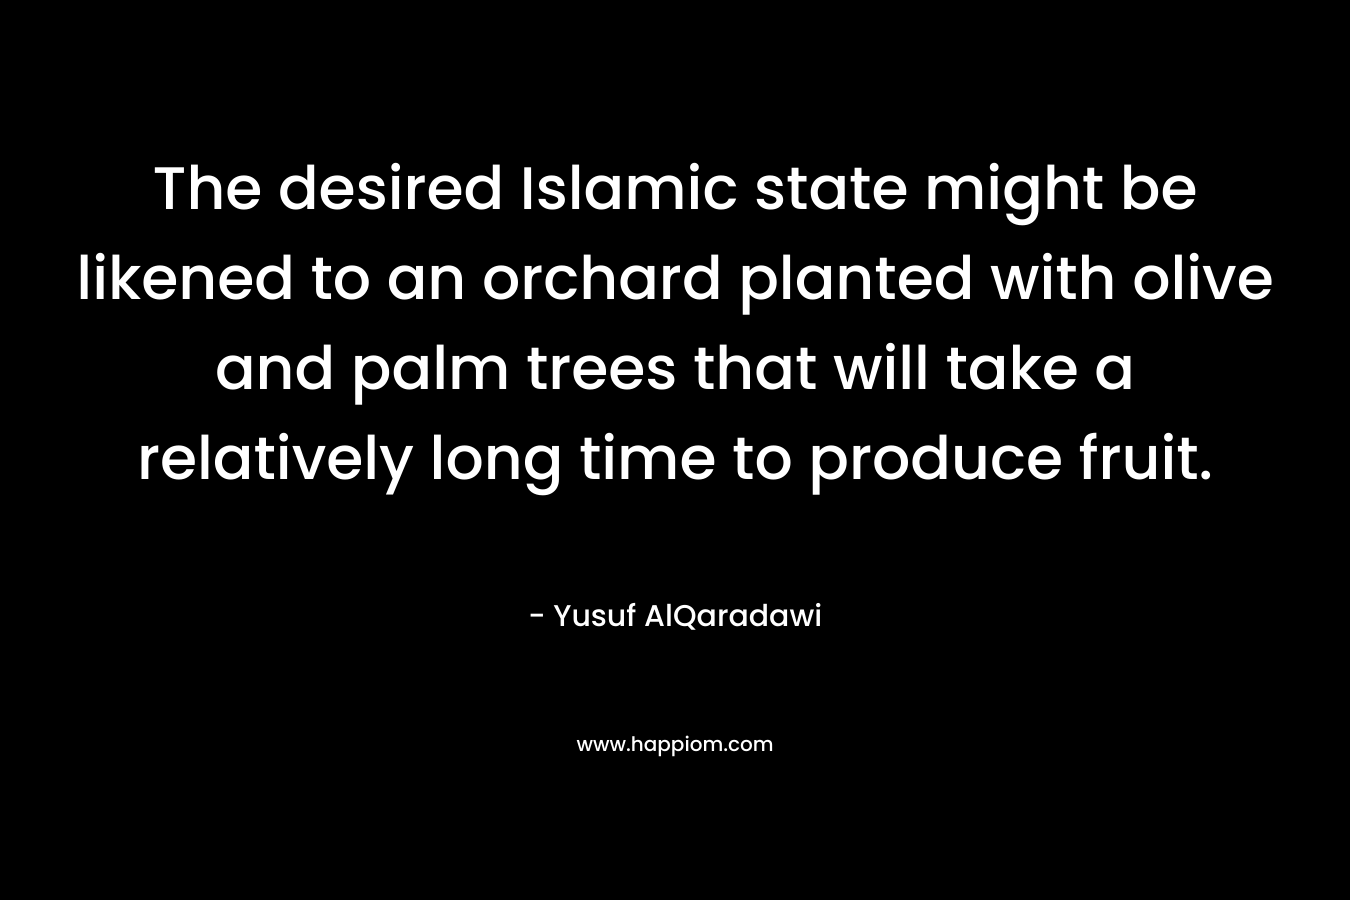 The desired Islamic state might be likened to an orchard planted with olive and palm trees that will take a relatively long time to produce fruit. – Yusuf AlQaradawi